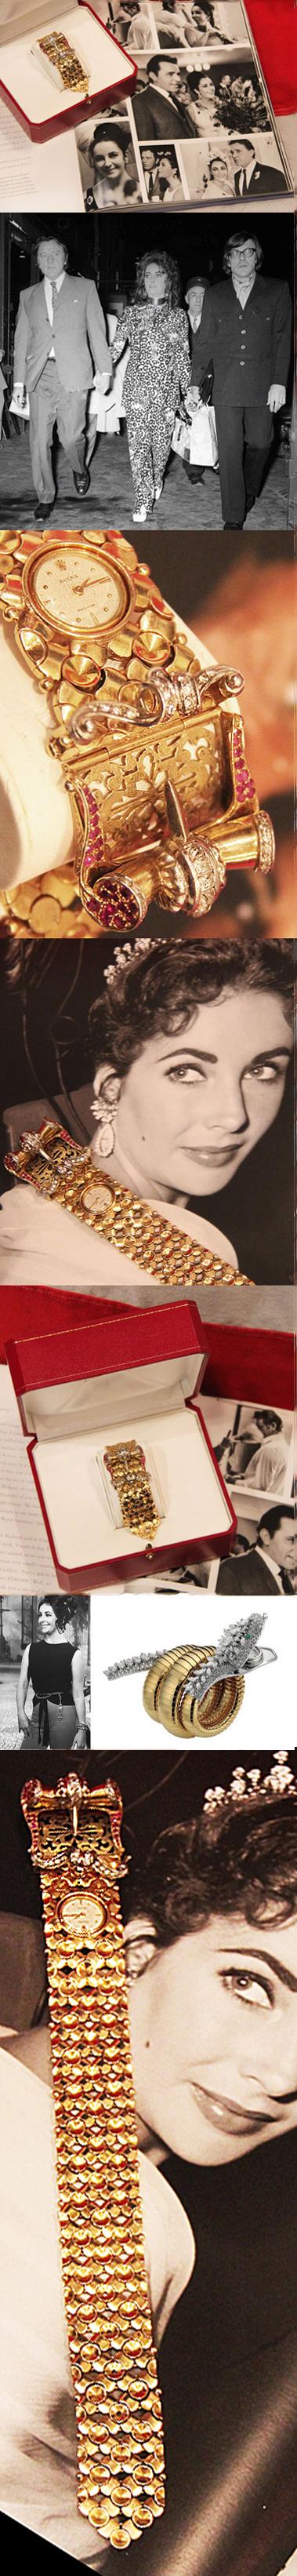 The Spectacular, Elizabeth Taylor, 'Million Dollar' Gold, Diamond And Ruby Rolex 'Mystery' Watch, With a Diamond & Ruby Bracelet. Described As, Probably, The Most Spectacular, Beautiful and Unique Rolex Watch in the World